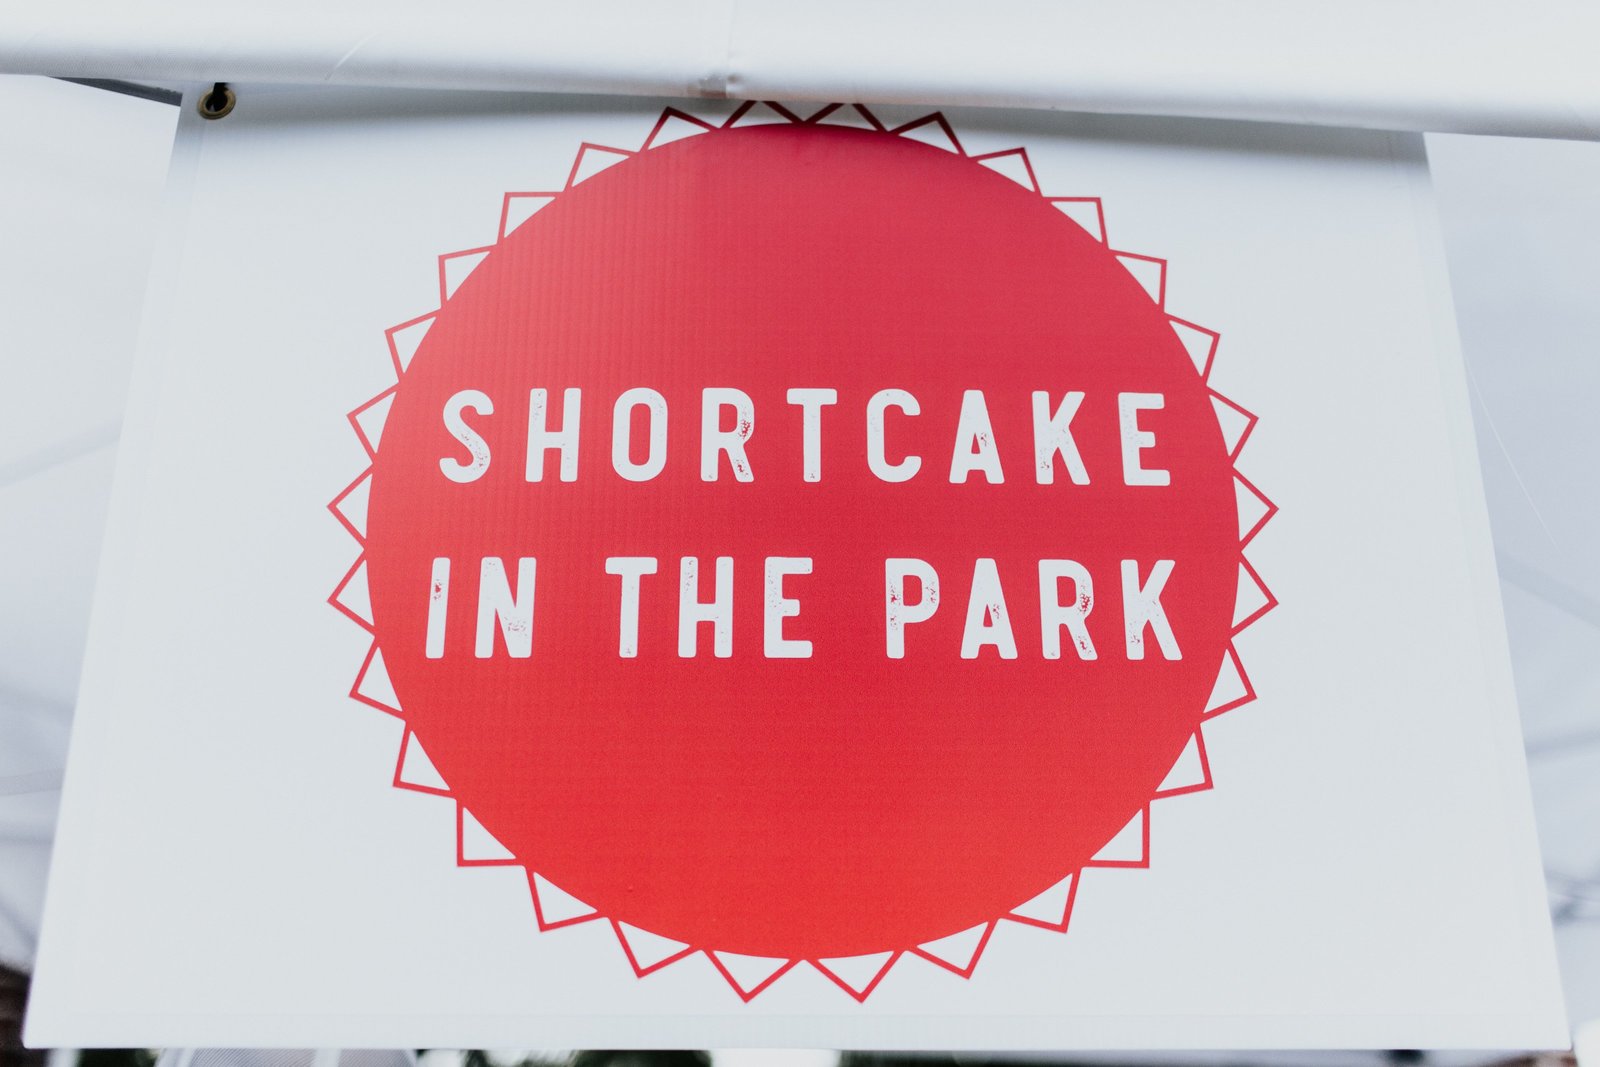 2019 West Tennessee Strawberry Festival - Shortcake in the park - 24